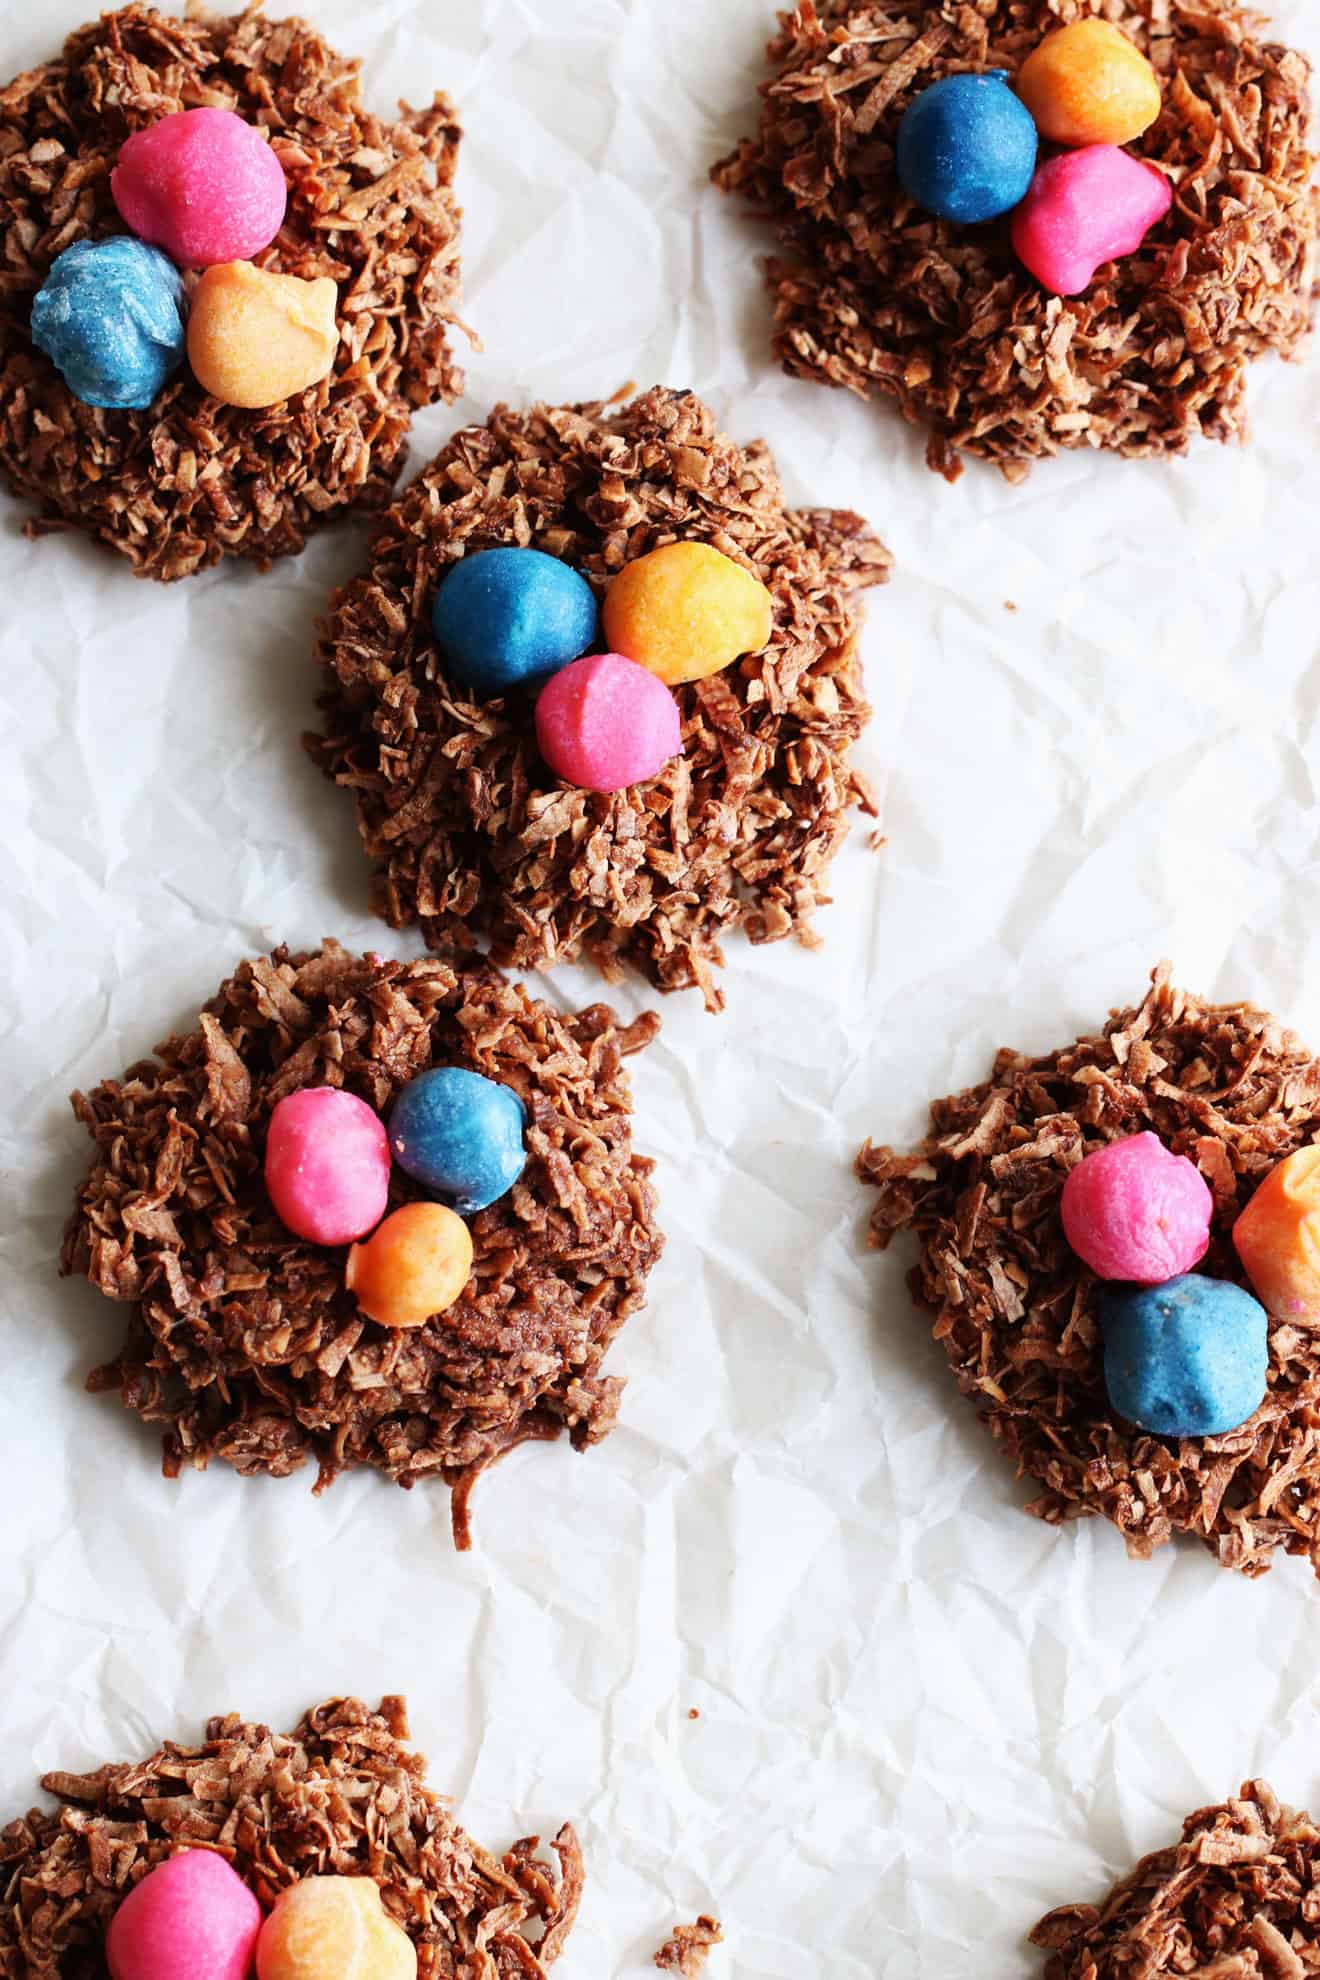 This is an overhead image of chocolate coconut birds nest cookies with colorful nuts in the center of each one. The cookies resemble a bird's nest and are sitting on a white piece of parchment paper.